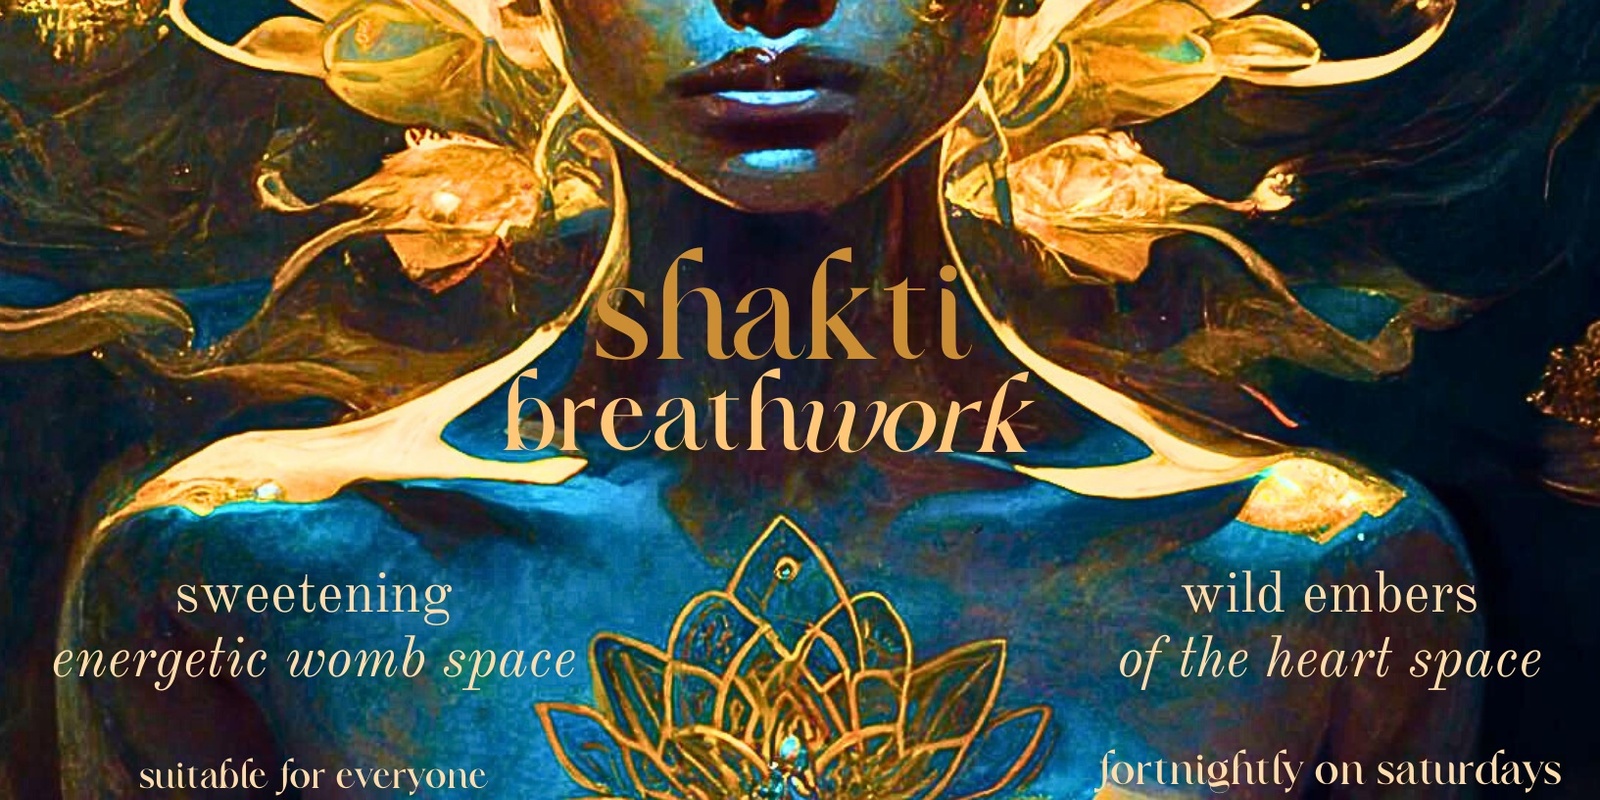 Banner image for 𝗕𝗿𝗲𝗮𝘁𝗵𝘄𝗼𝗿𝗸 ♥ 𝗦𝗵𝗮𝗸𝘁𝗶 𝗕𝗿𝗲𝗮𝘁𝗵𝘄𝗼𝗿𝗸 - sweetening the energetic Womb space + wild embers of the Heart space